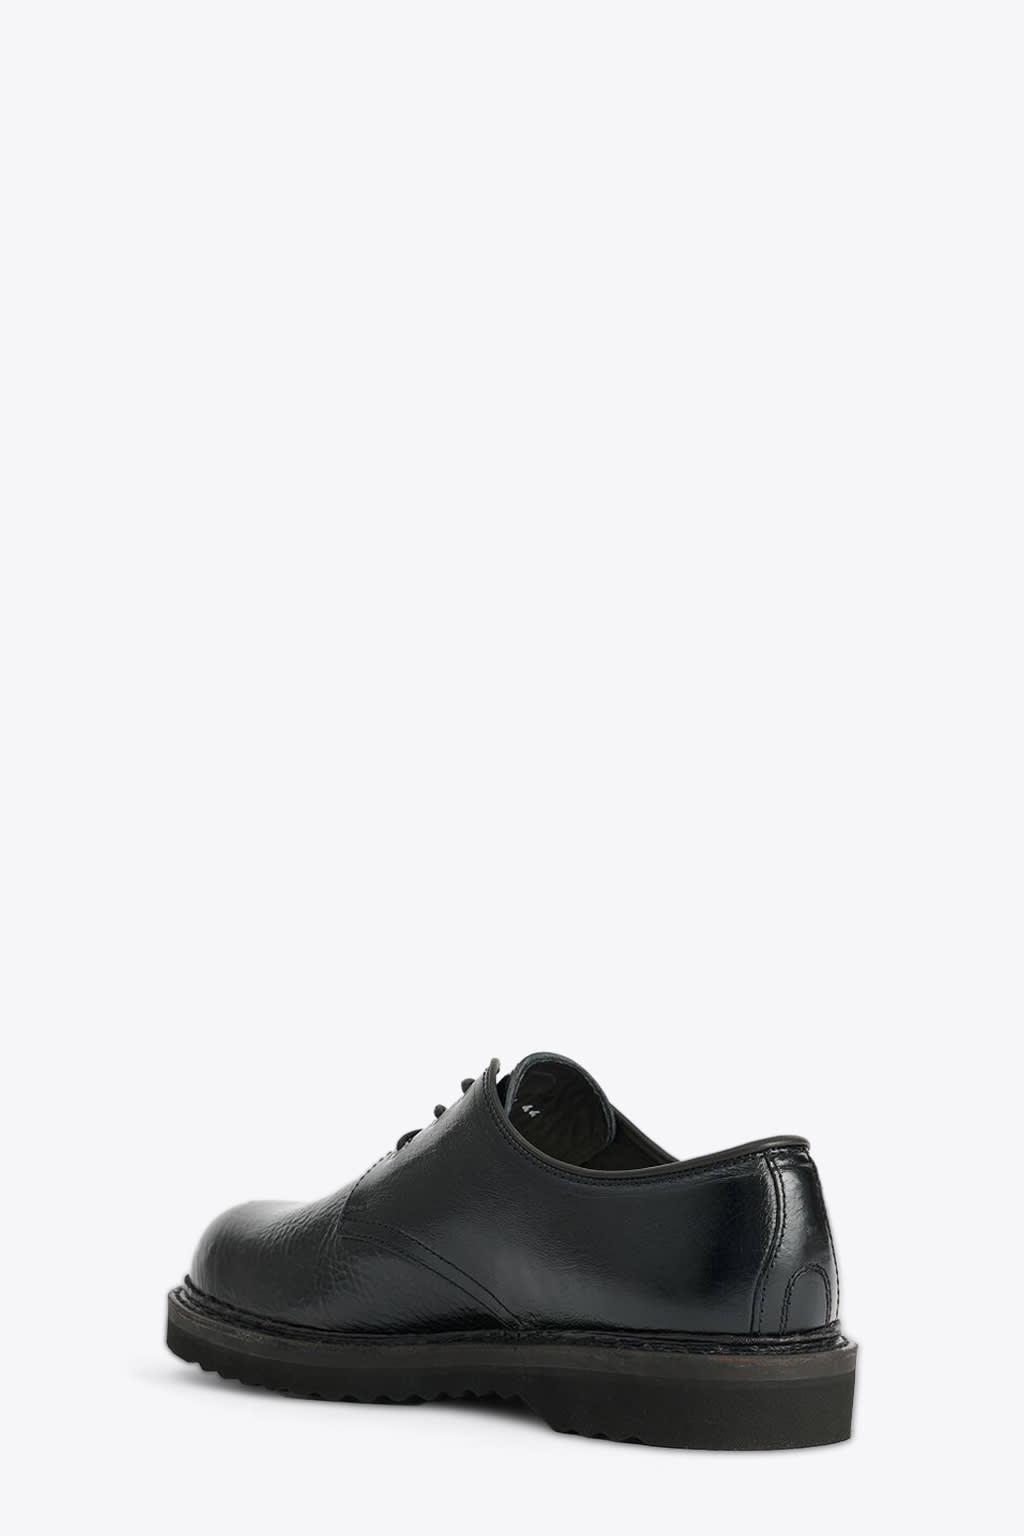 Our Legacy Trampler Shoe Black Cracked Patent Leather Derby